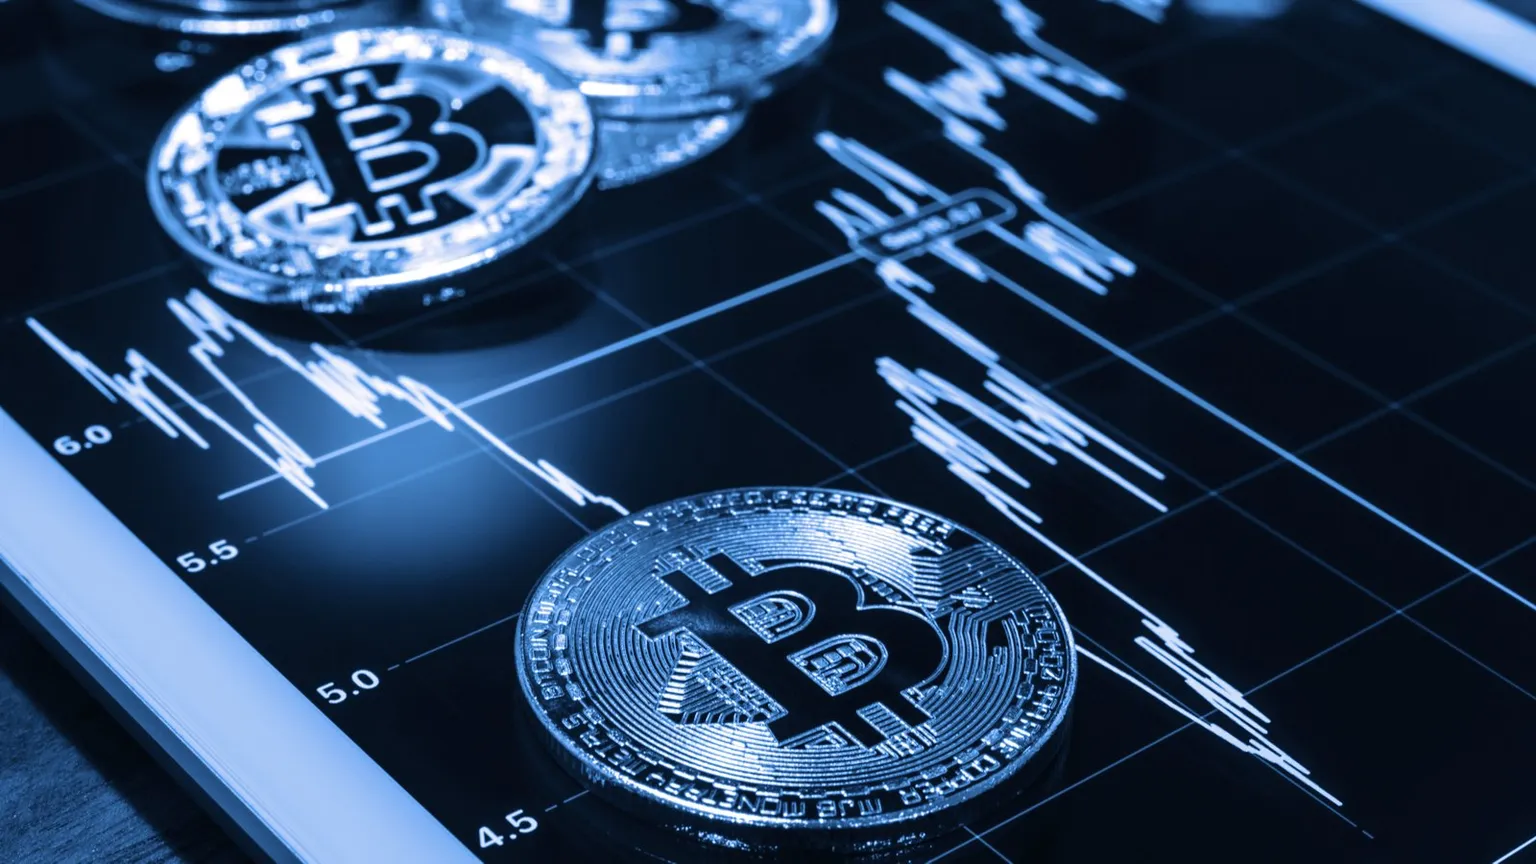 Bitcoin is the most valuable cryptocurrency by market cap. Image: Shutterstock